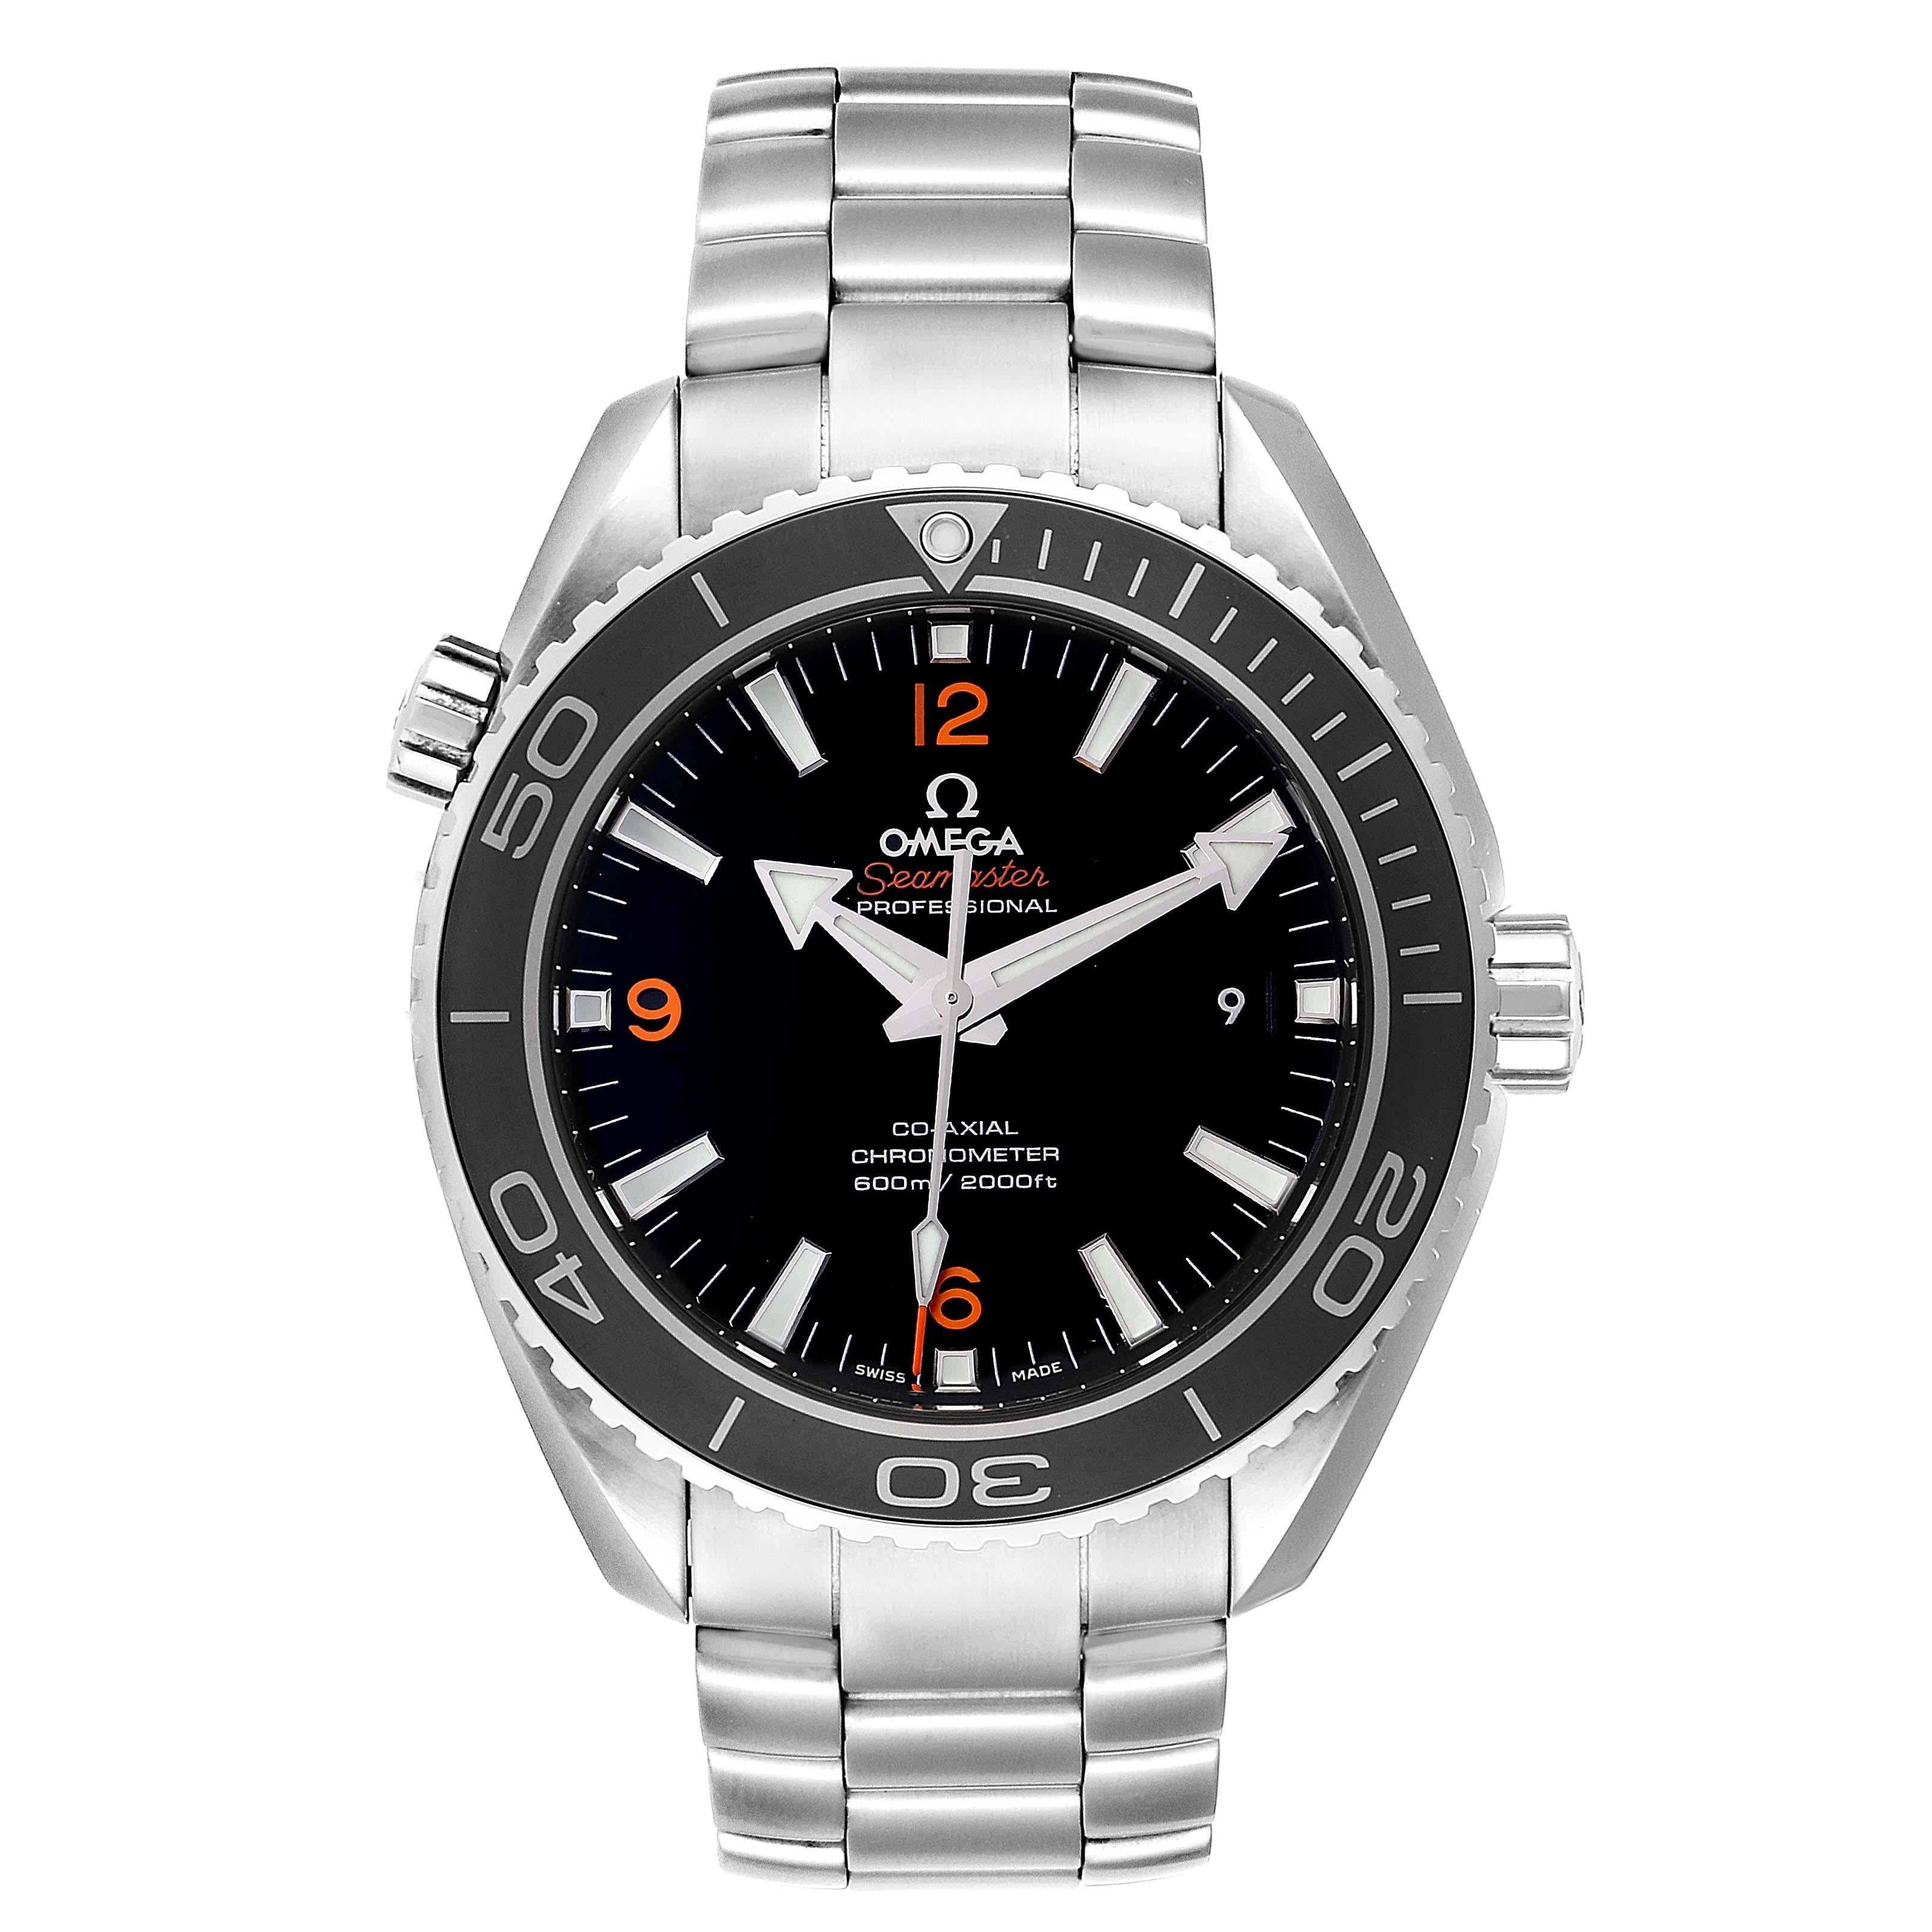 Omega Seamaster Planet Ocean 600M Watch 232.30.46.21.01.003 Box Card. Automatic self-winding chronograph movement with column wheel mechanism and Co-Axial Escapement for greater precision, stability and durability of the movement. Silicon